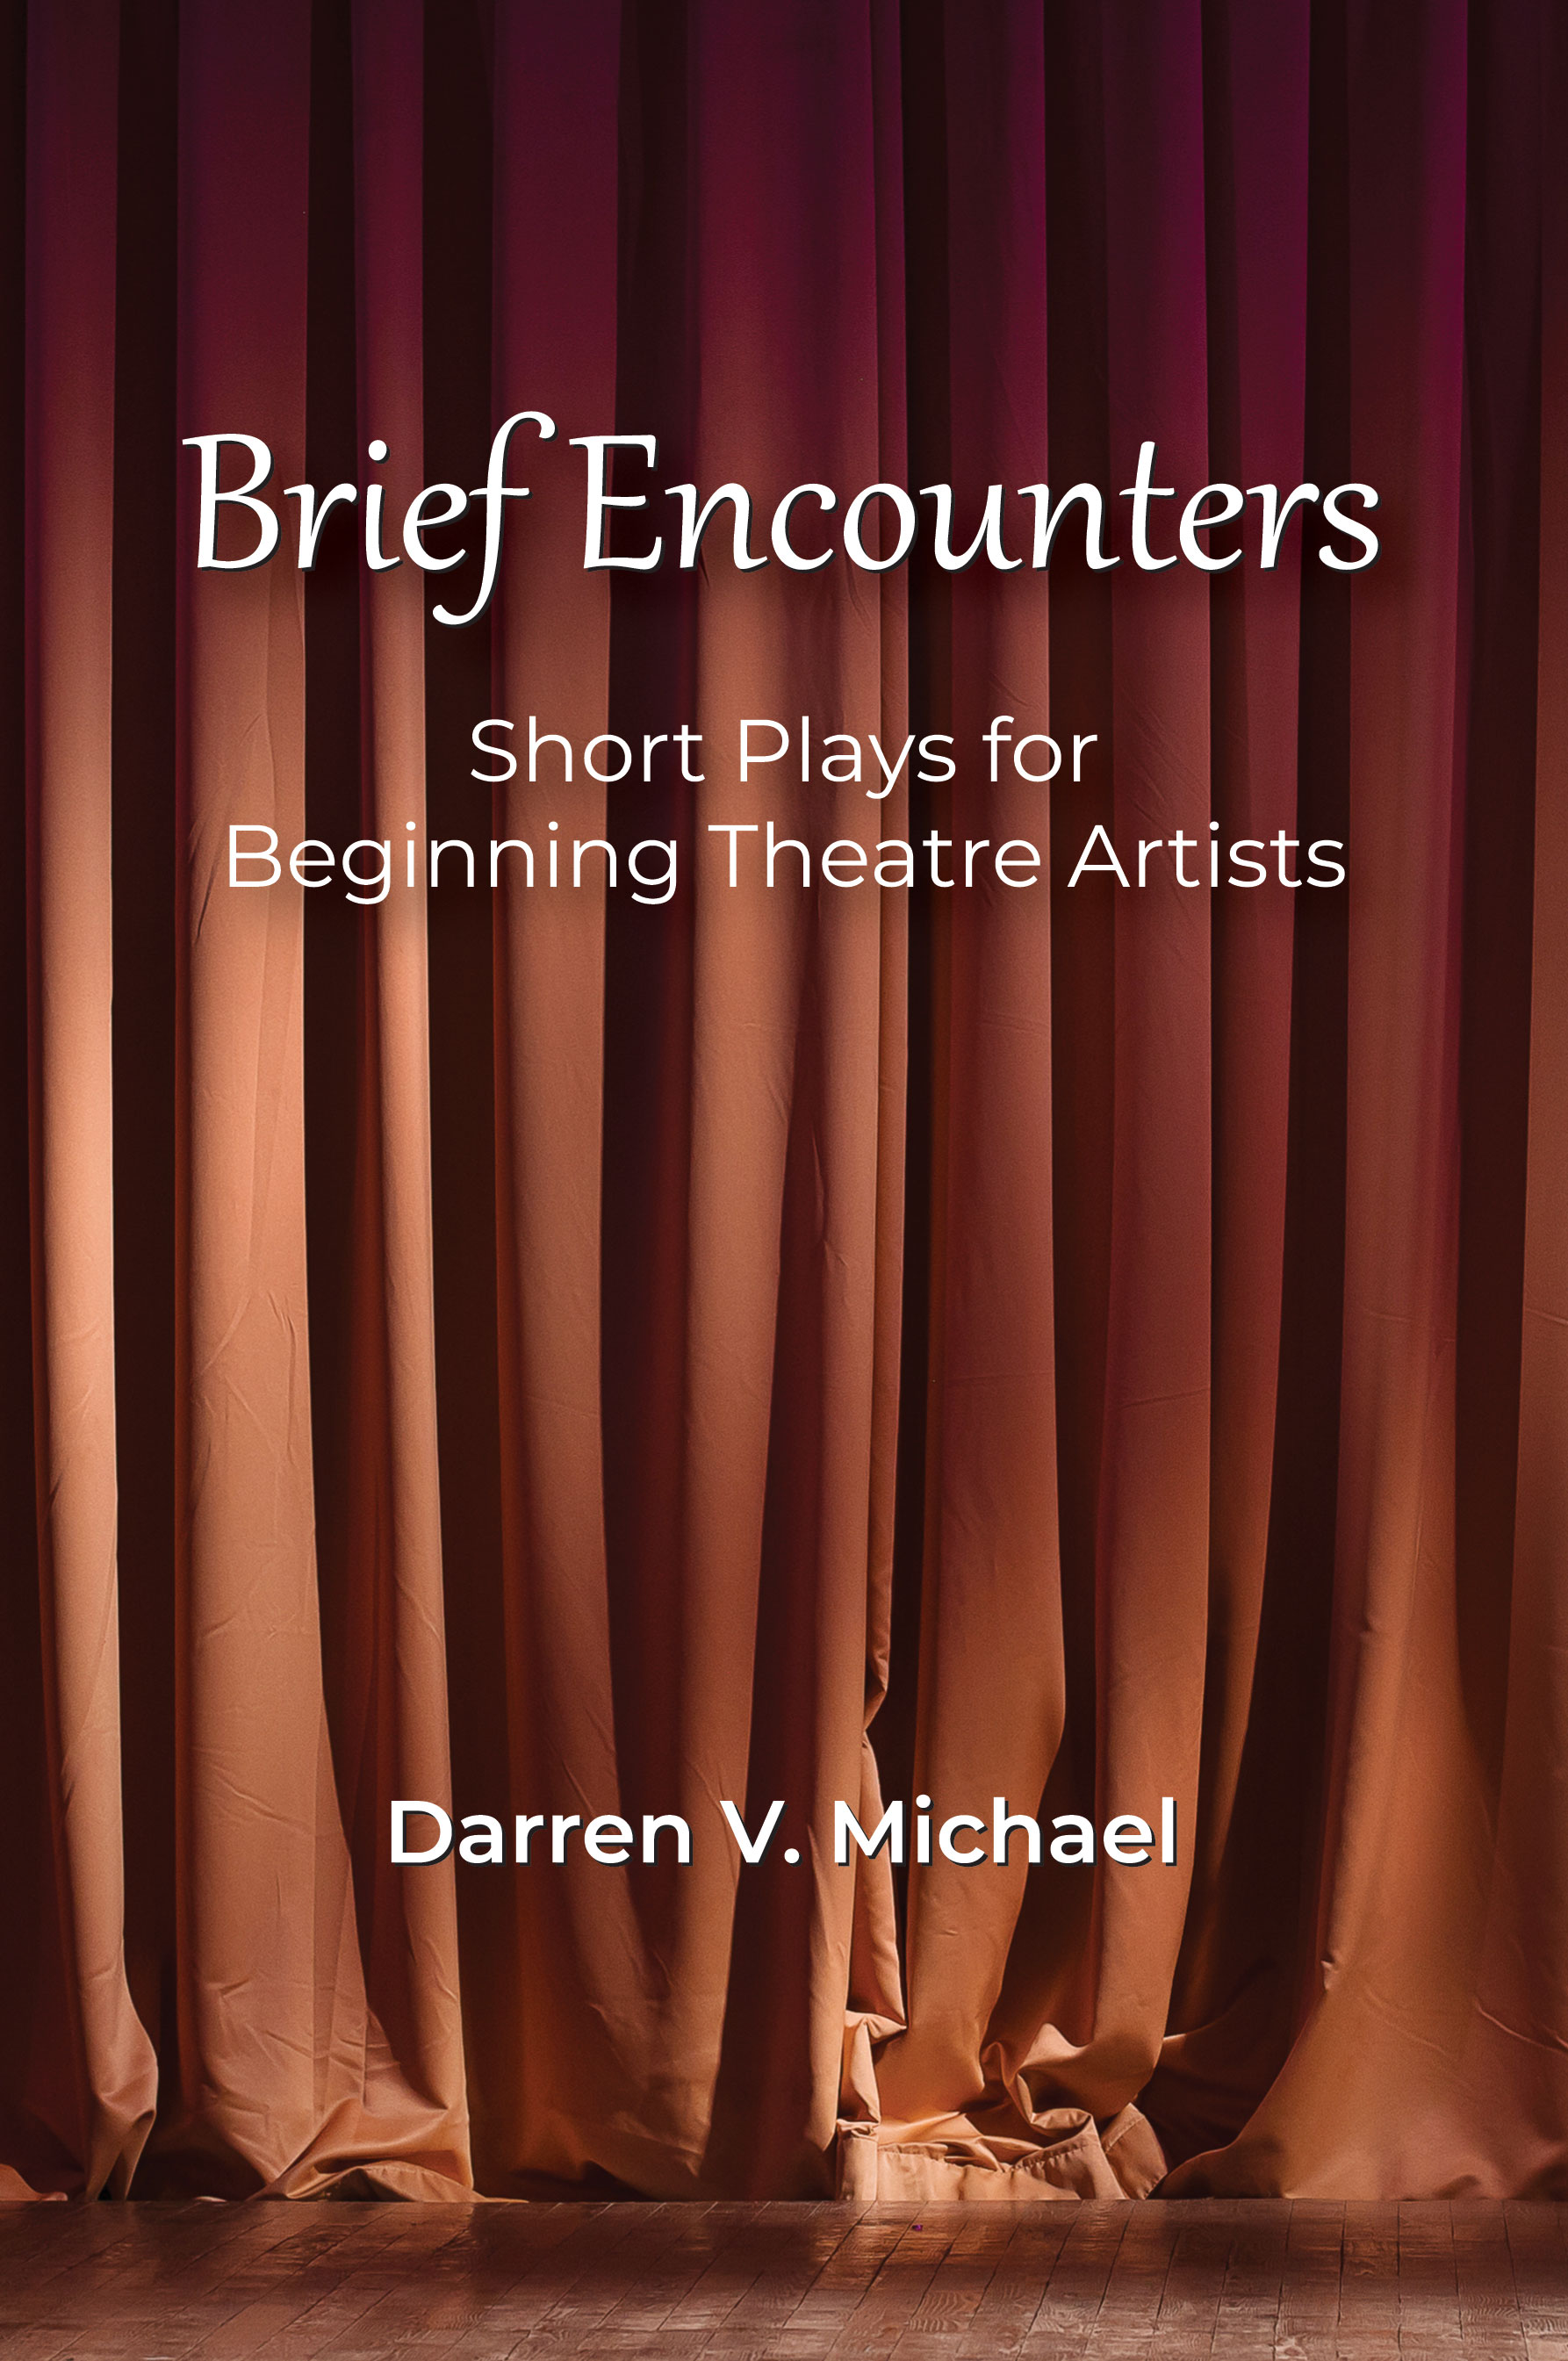 Brief Encounters: Short Plays for Beginning Theatre Artists by Darren V. Michael